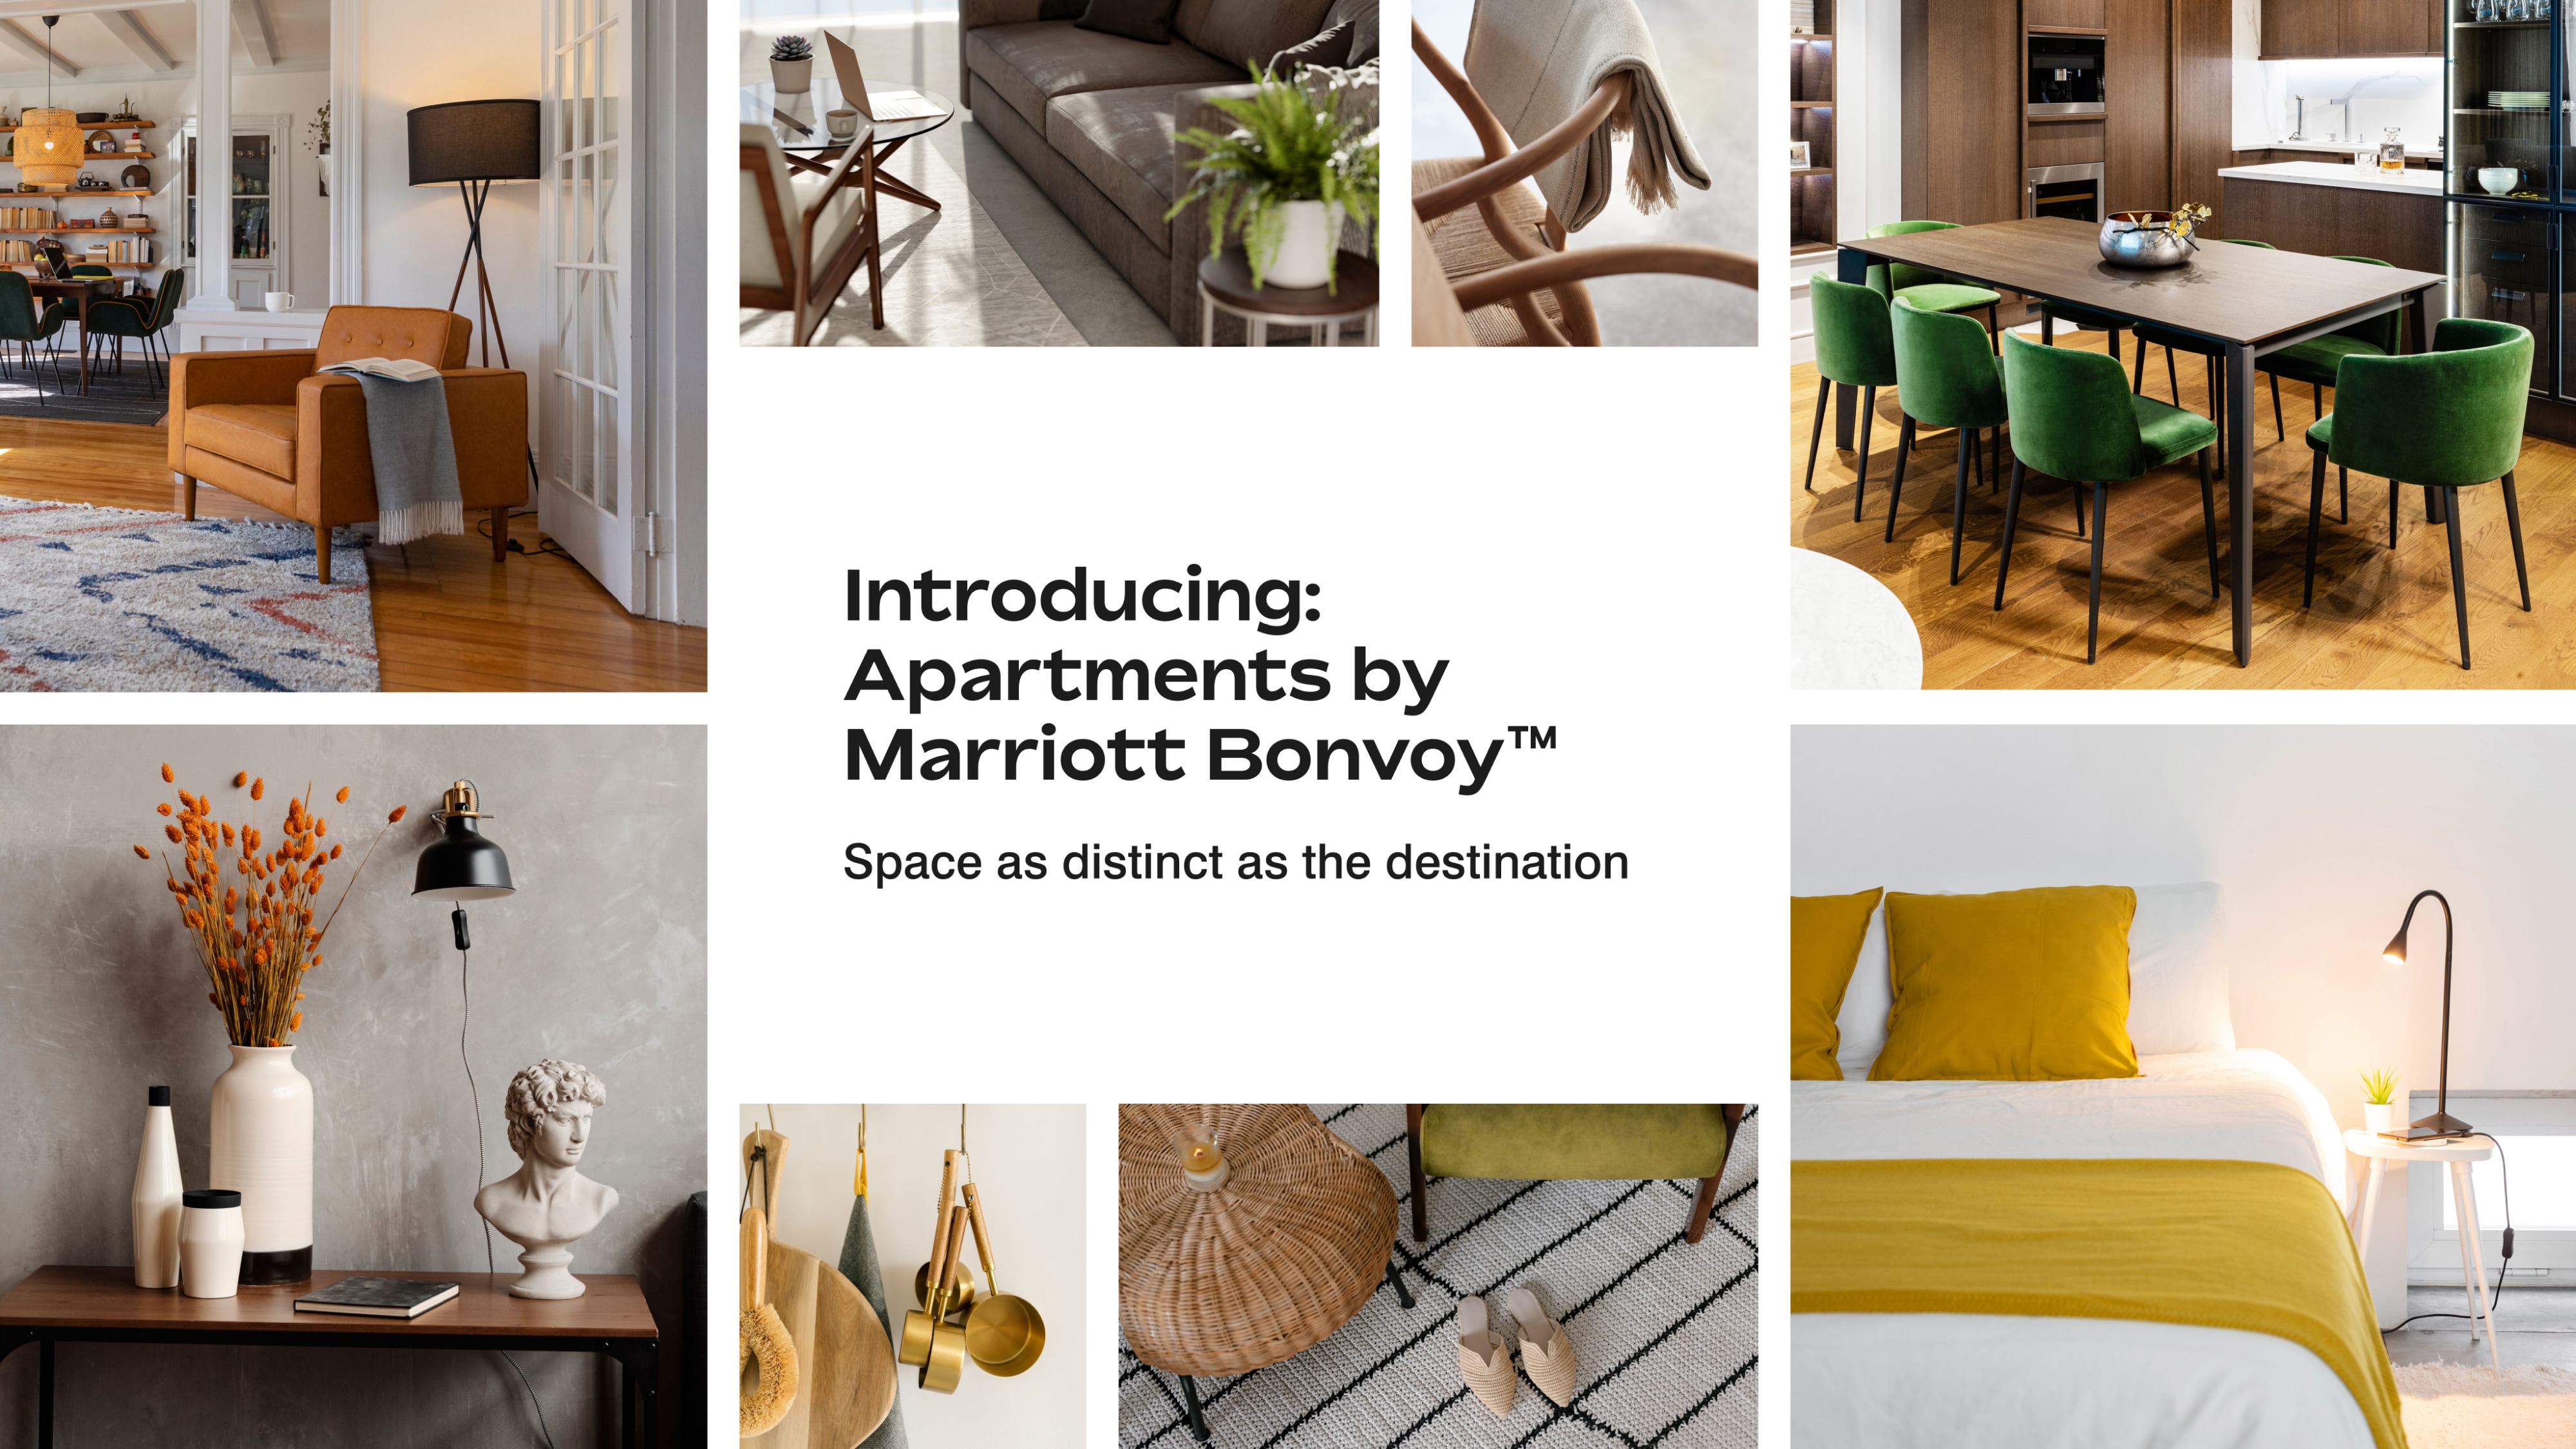 Apartments by Marriott products in a collage